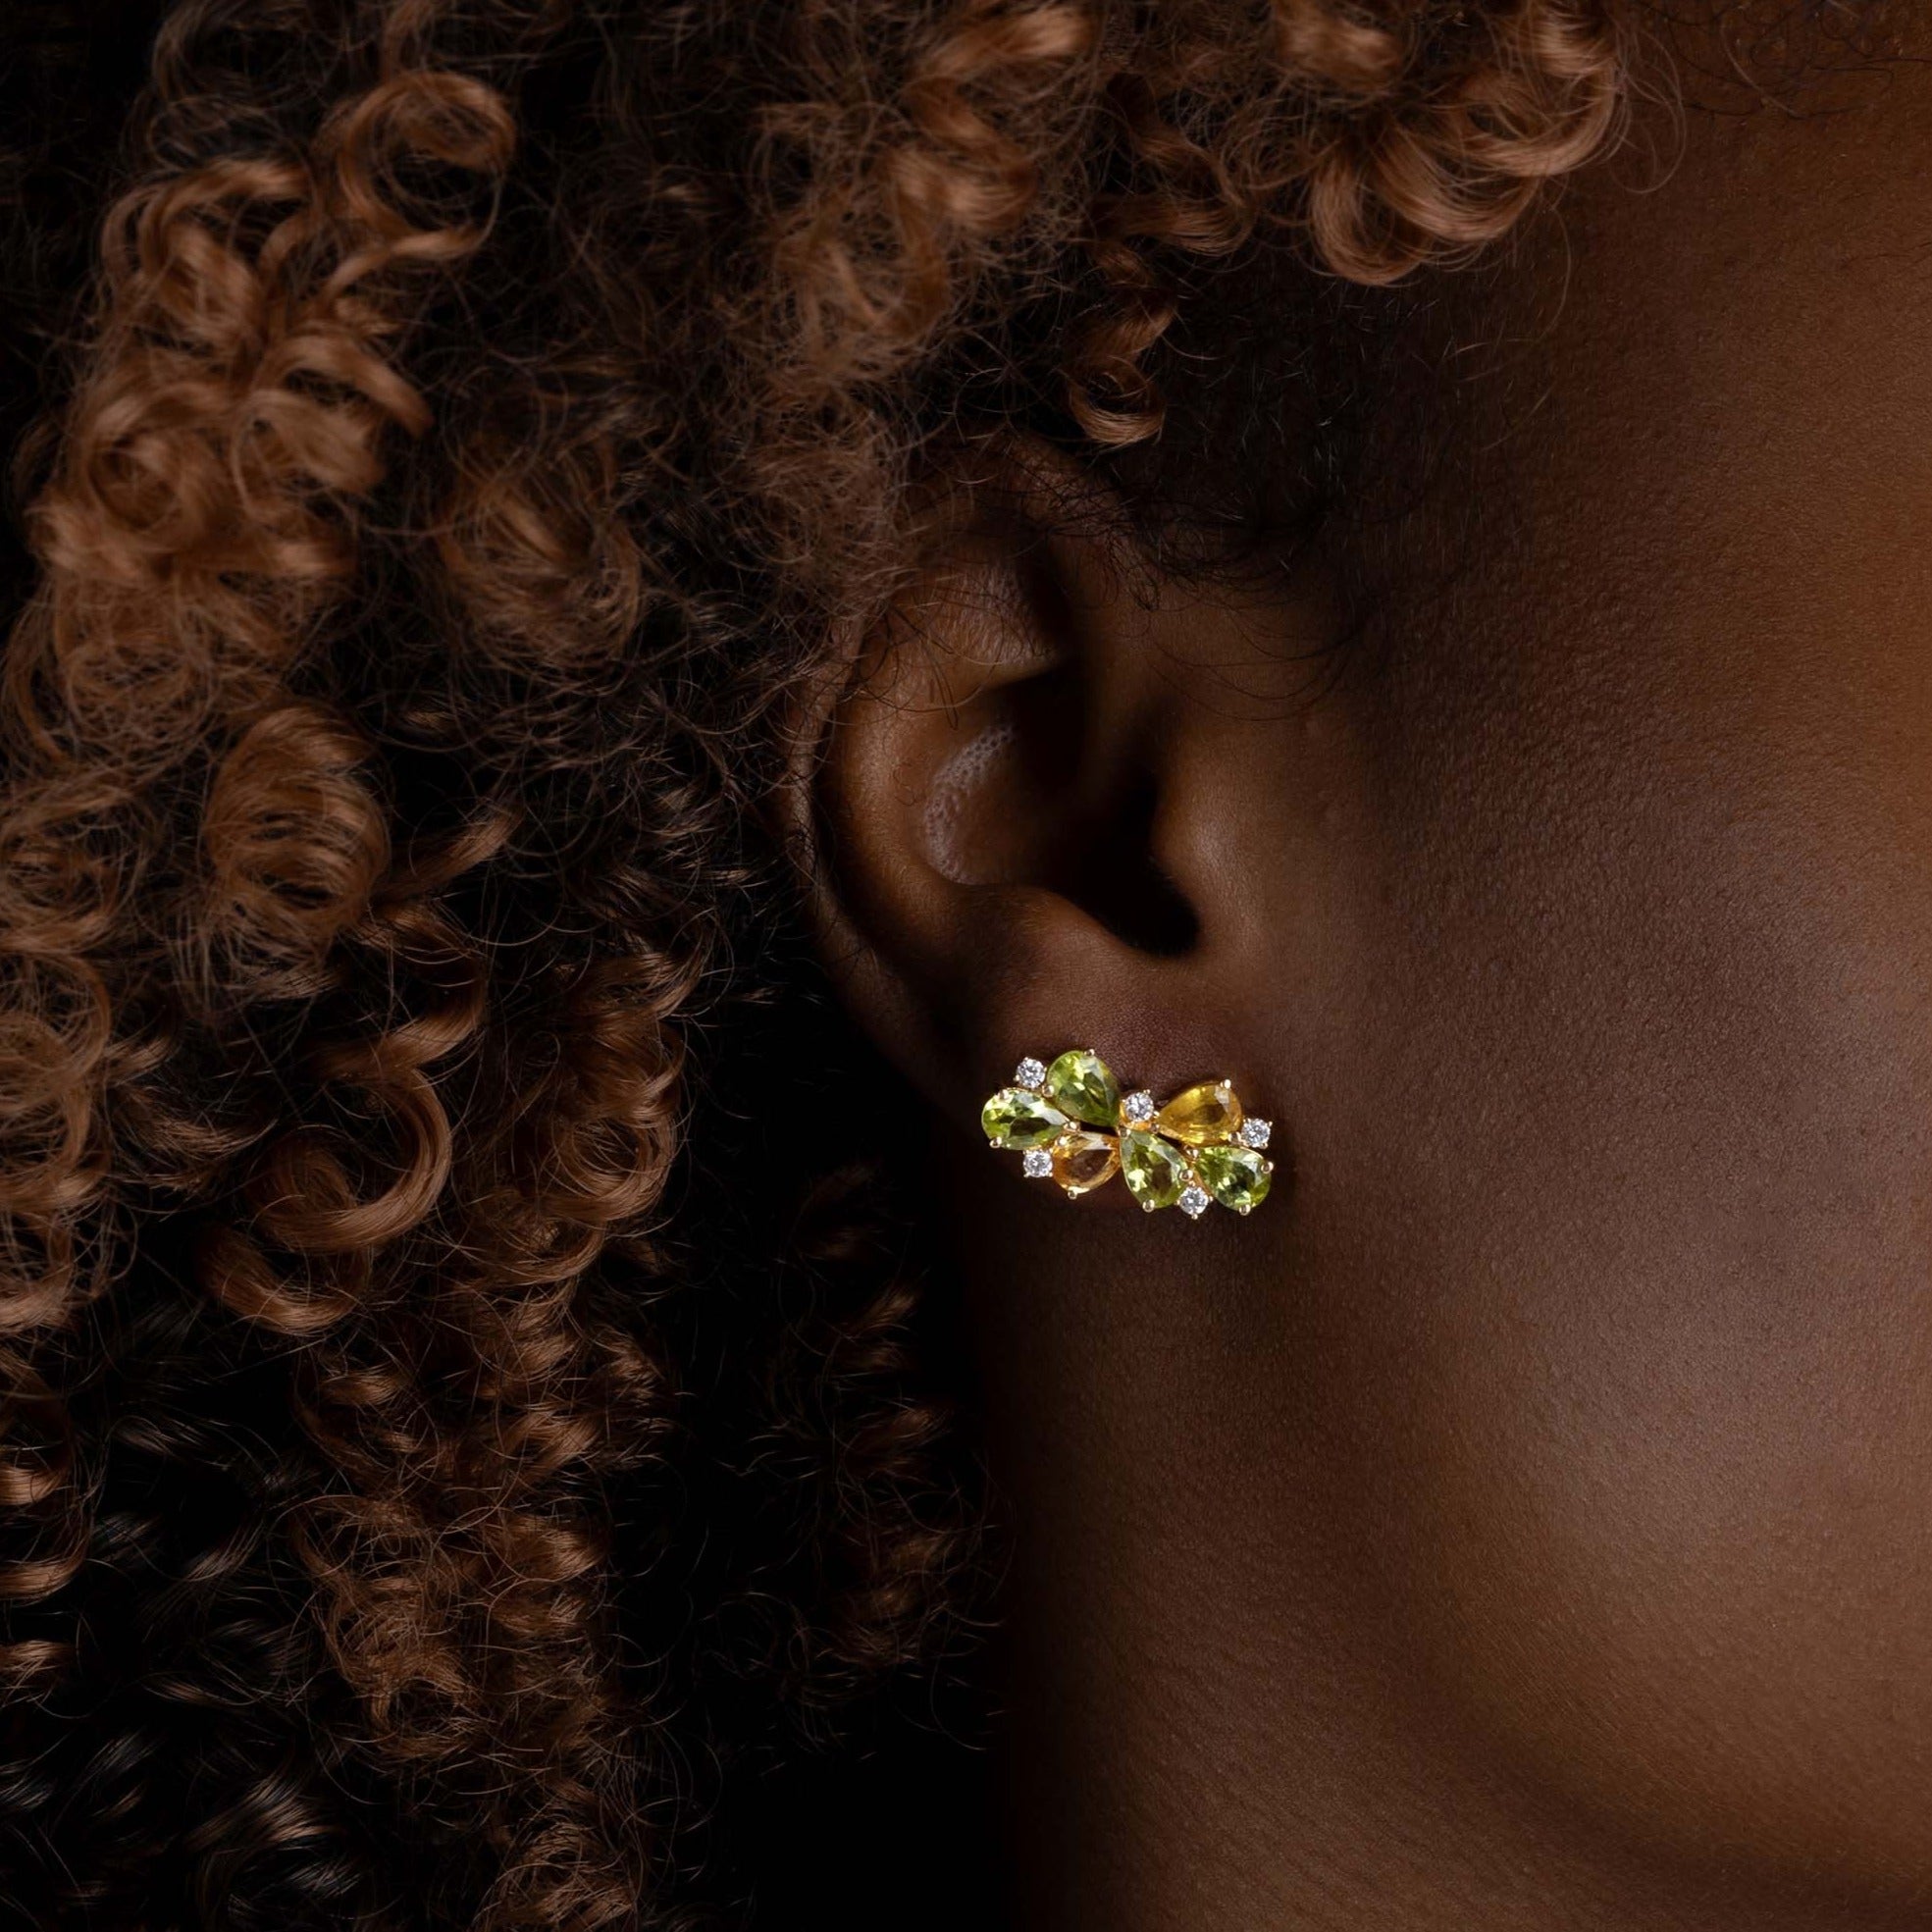 Yellow Gold Earrings with Yellow Sapphires, Peridot, and Diamonds, Small - Model shot